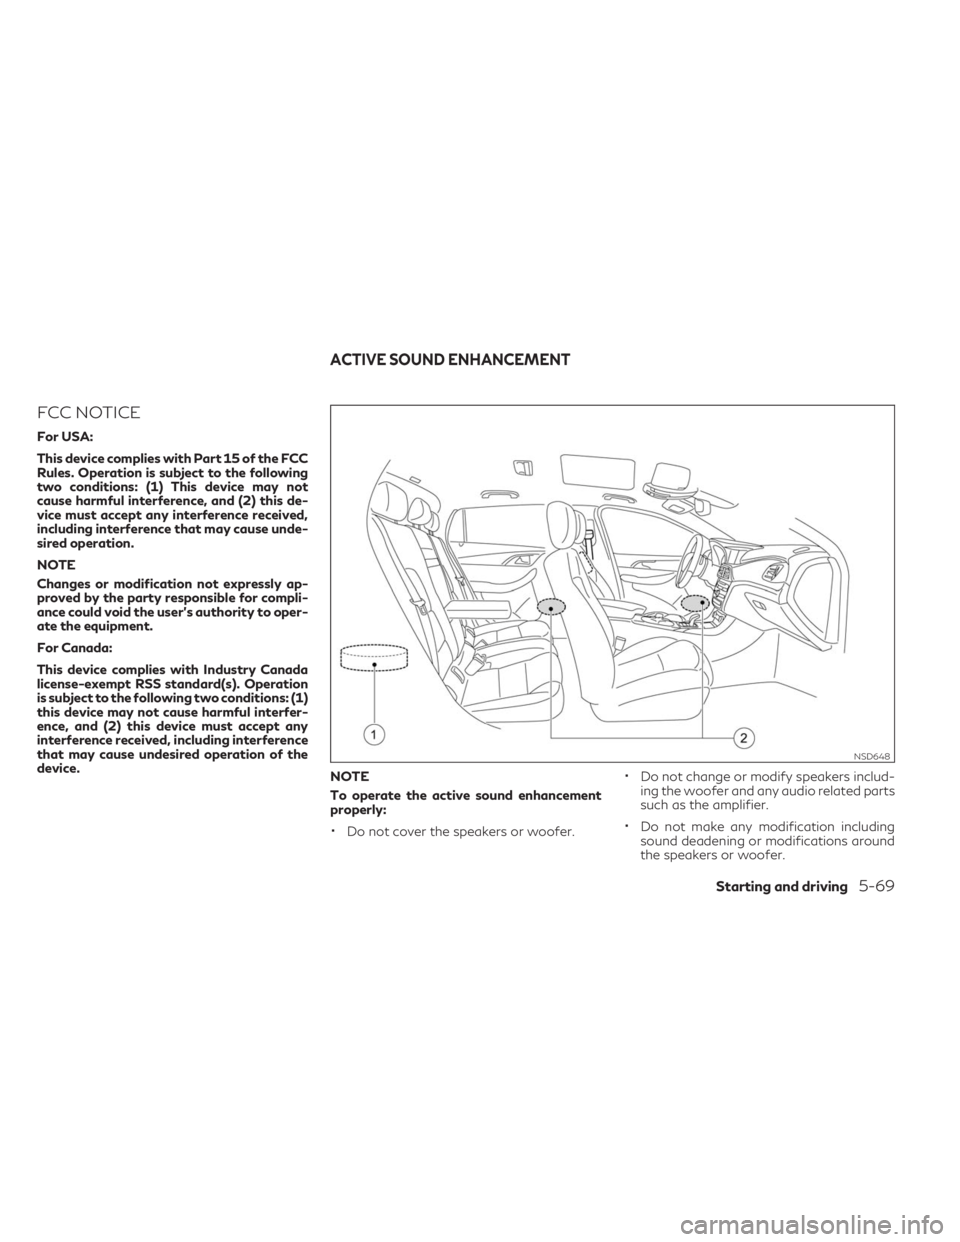 INFINITI QX30 2019 Service Manual FCC NOTICE
For USA:
This device complies with Part 15 of the FCC
Rules. Operation is subject to the following
two conditions: (1) This device may not
cause harmful interference, and (2) this de-
vice 